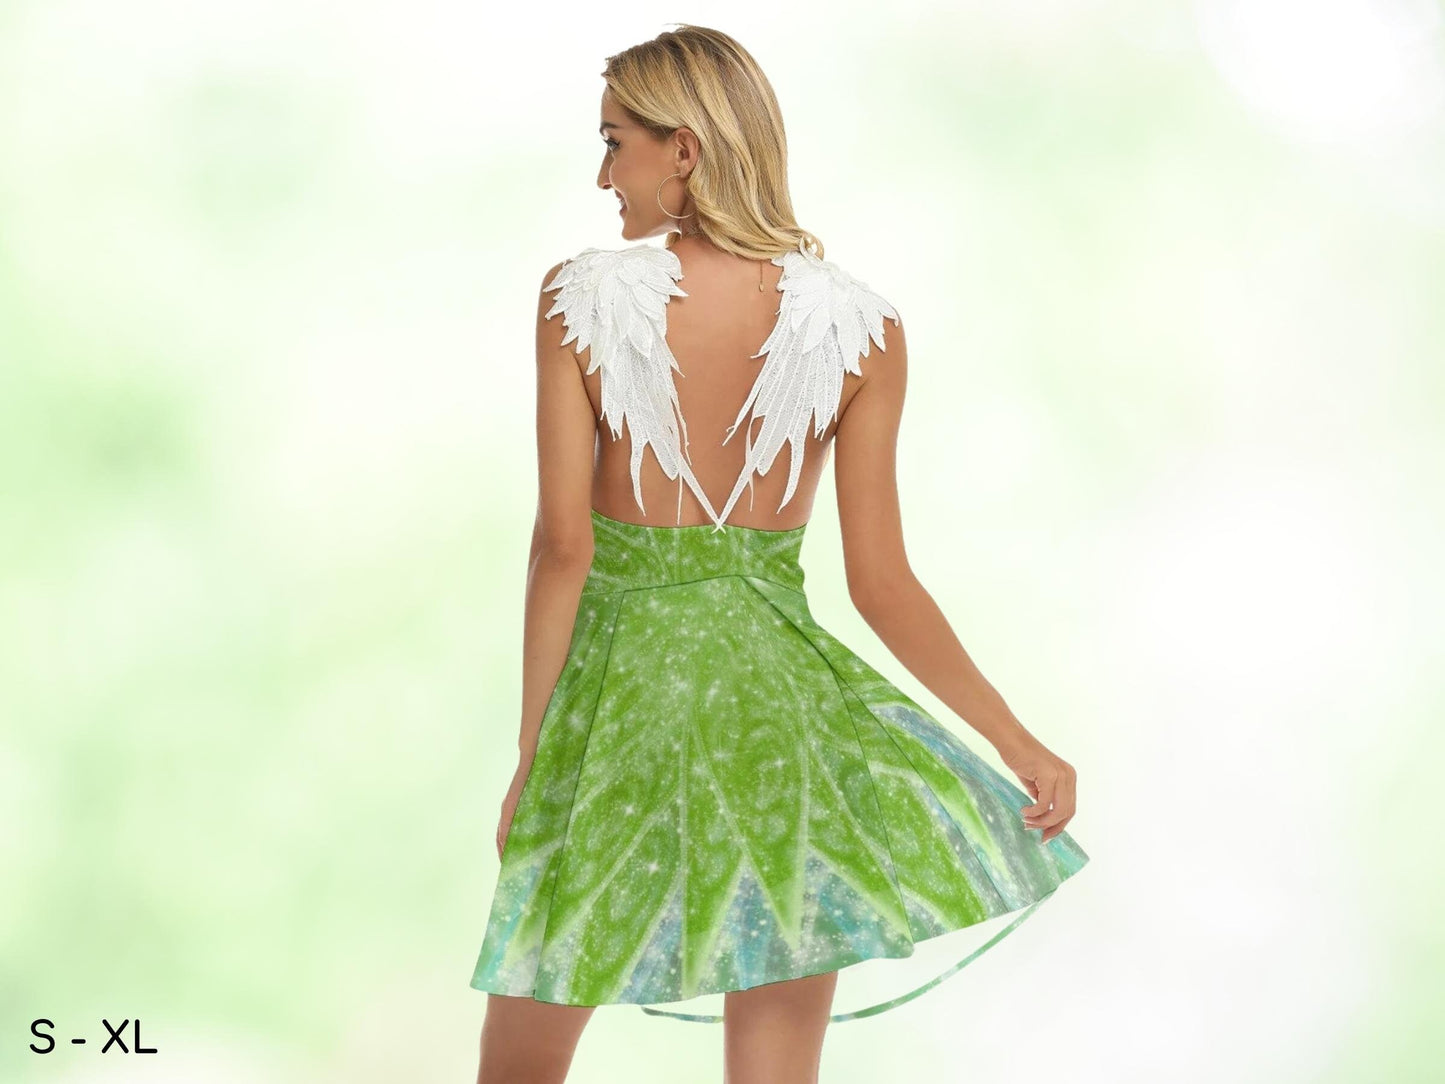 Tinkerbell Dress with Wings, With Logo or Without Logo, Halloween, Gift for Her, Princess, Neverland, Peter Pan, Adult Halloween Costume